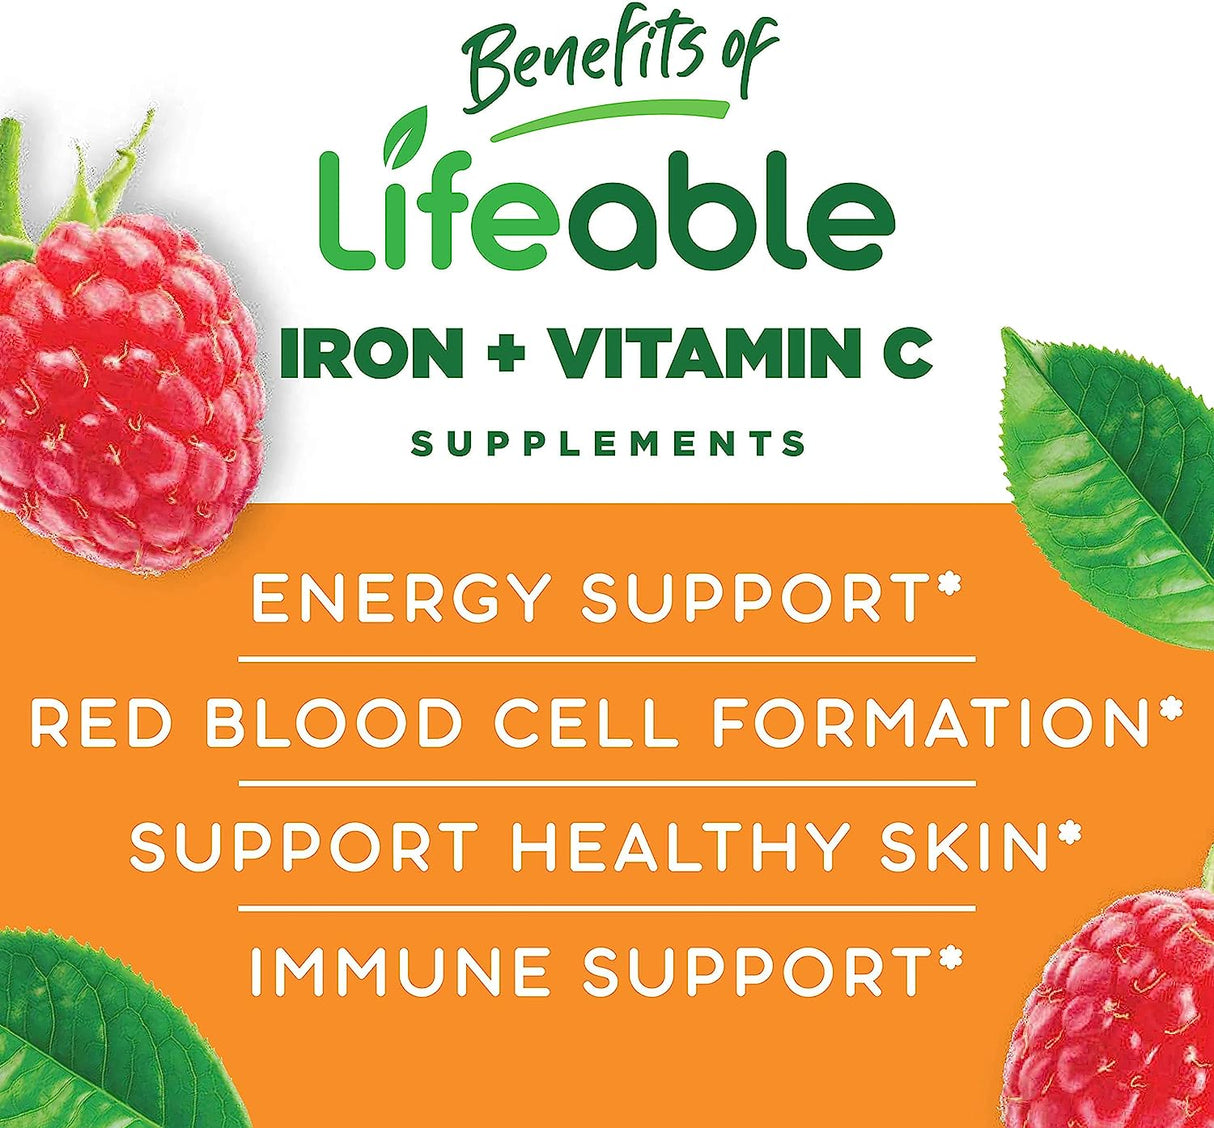 Lifeable Iron Gummies with Vitamin C 20Mg. 90 Gomitas - The Red Vitamin MX - Suplementos Alimenticios - LIFEABLE